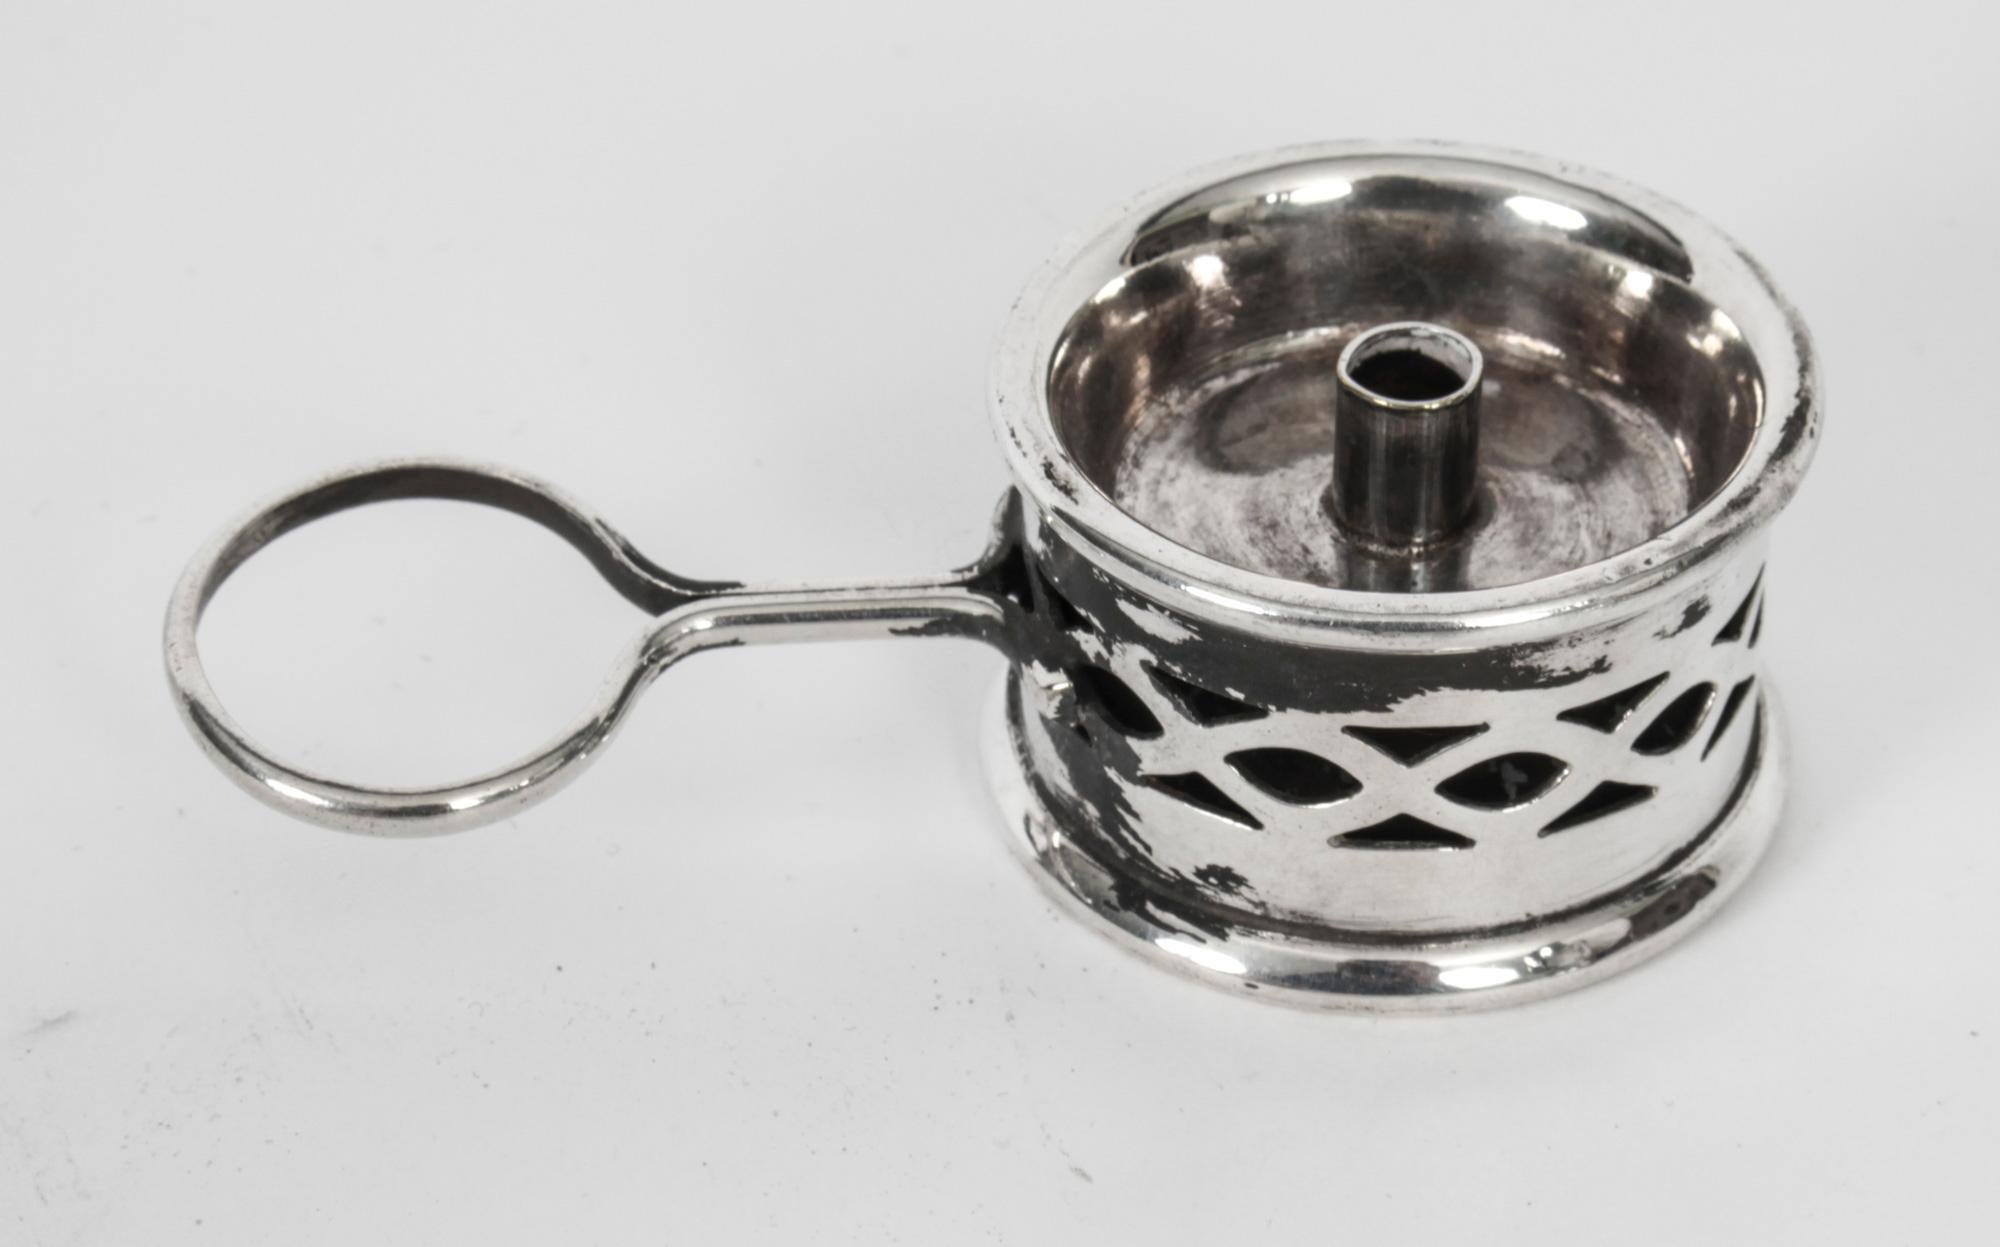 English Antique Victorian Silver Plated Egg Coddler / Boiler, 19th Century